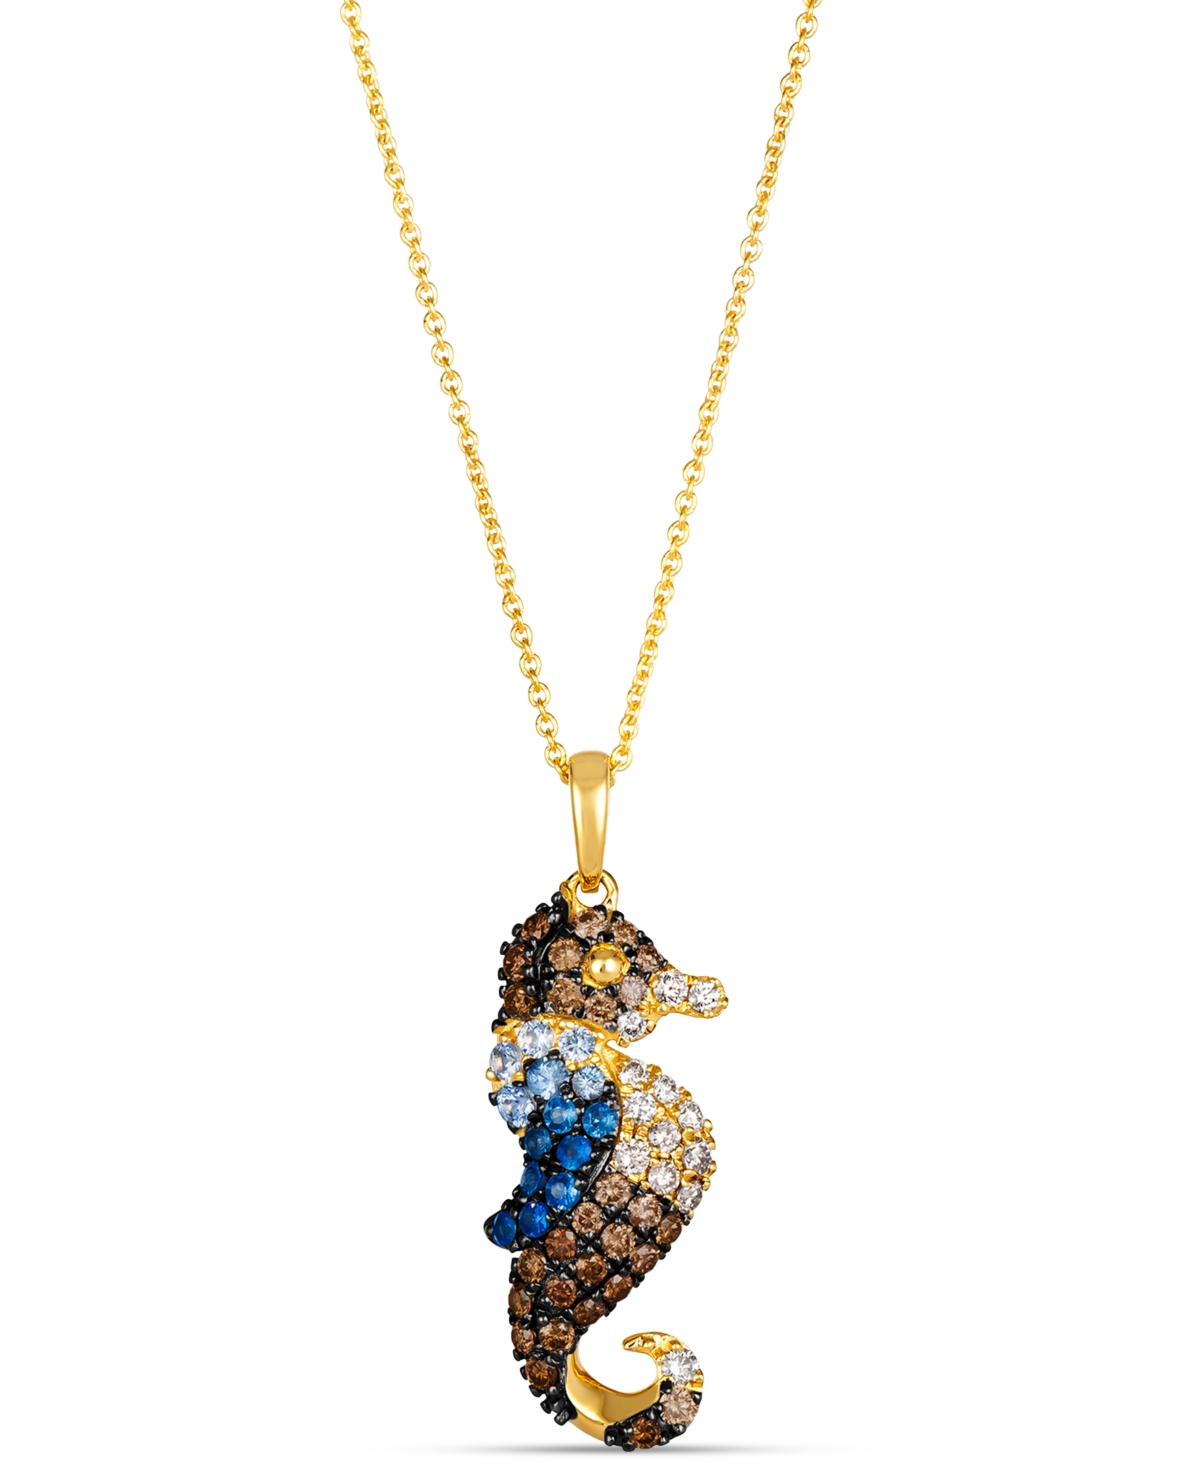 Ombre Multi-Gemstone (1/4 ct. t.w.) & Chocolate Ombre Diamond (1/2 ct. t.w.) Seahorse Pendant Necklace in 14k Gold, 18" + 2" extender